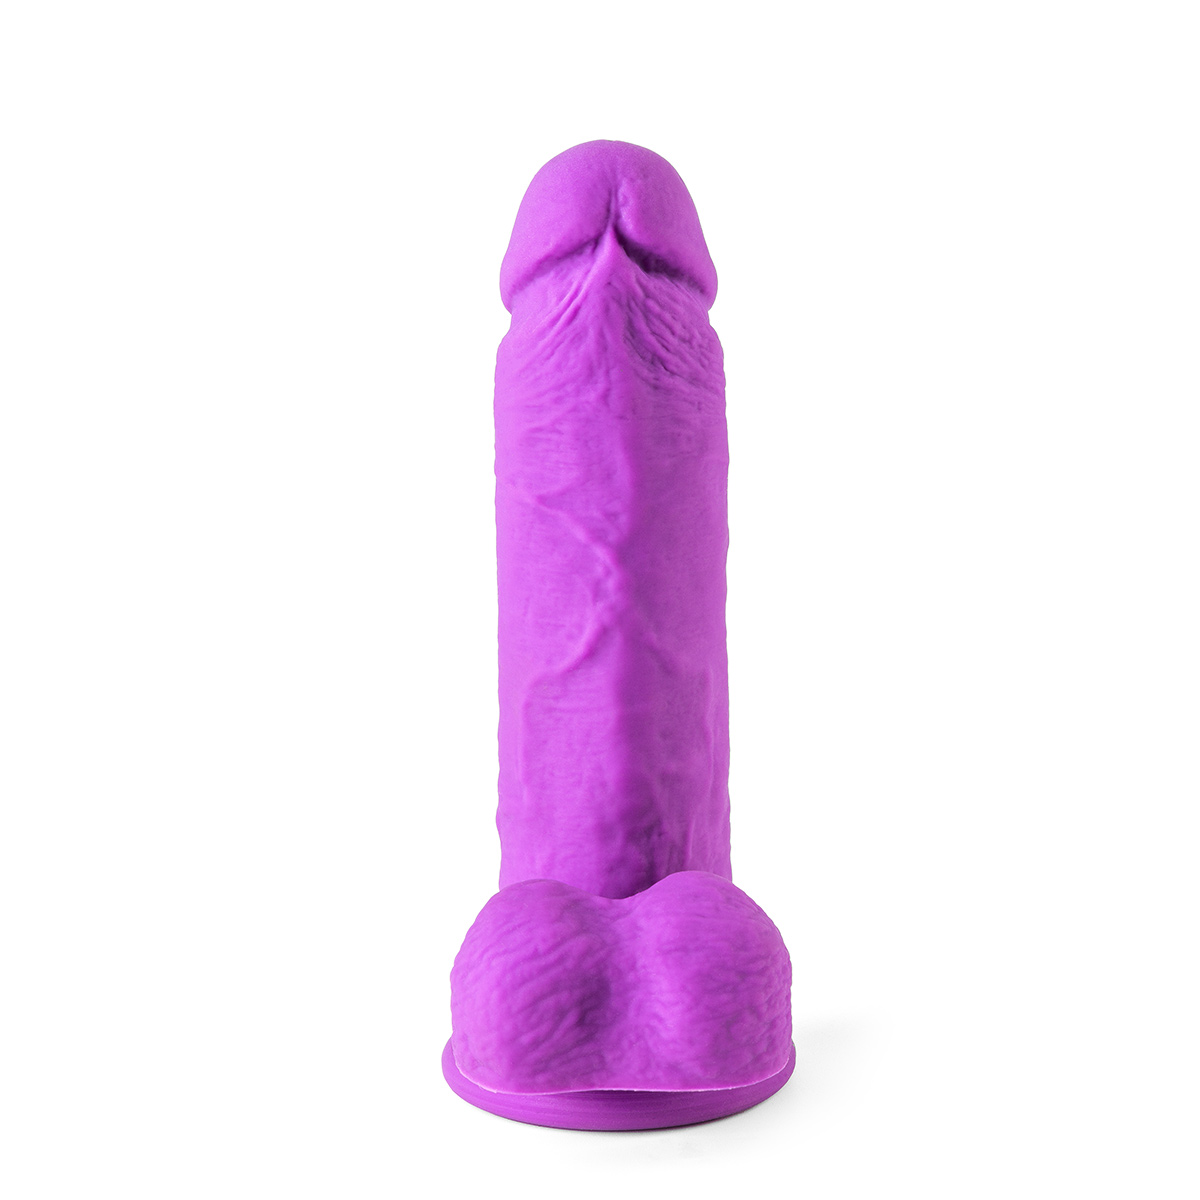 Vibrating-Realistic-with-Remote-R12-Purple-OPR-3090097-3